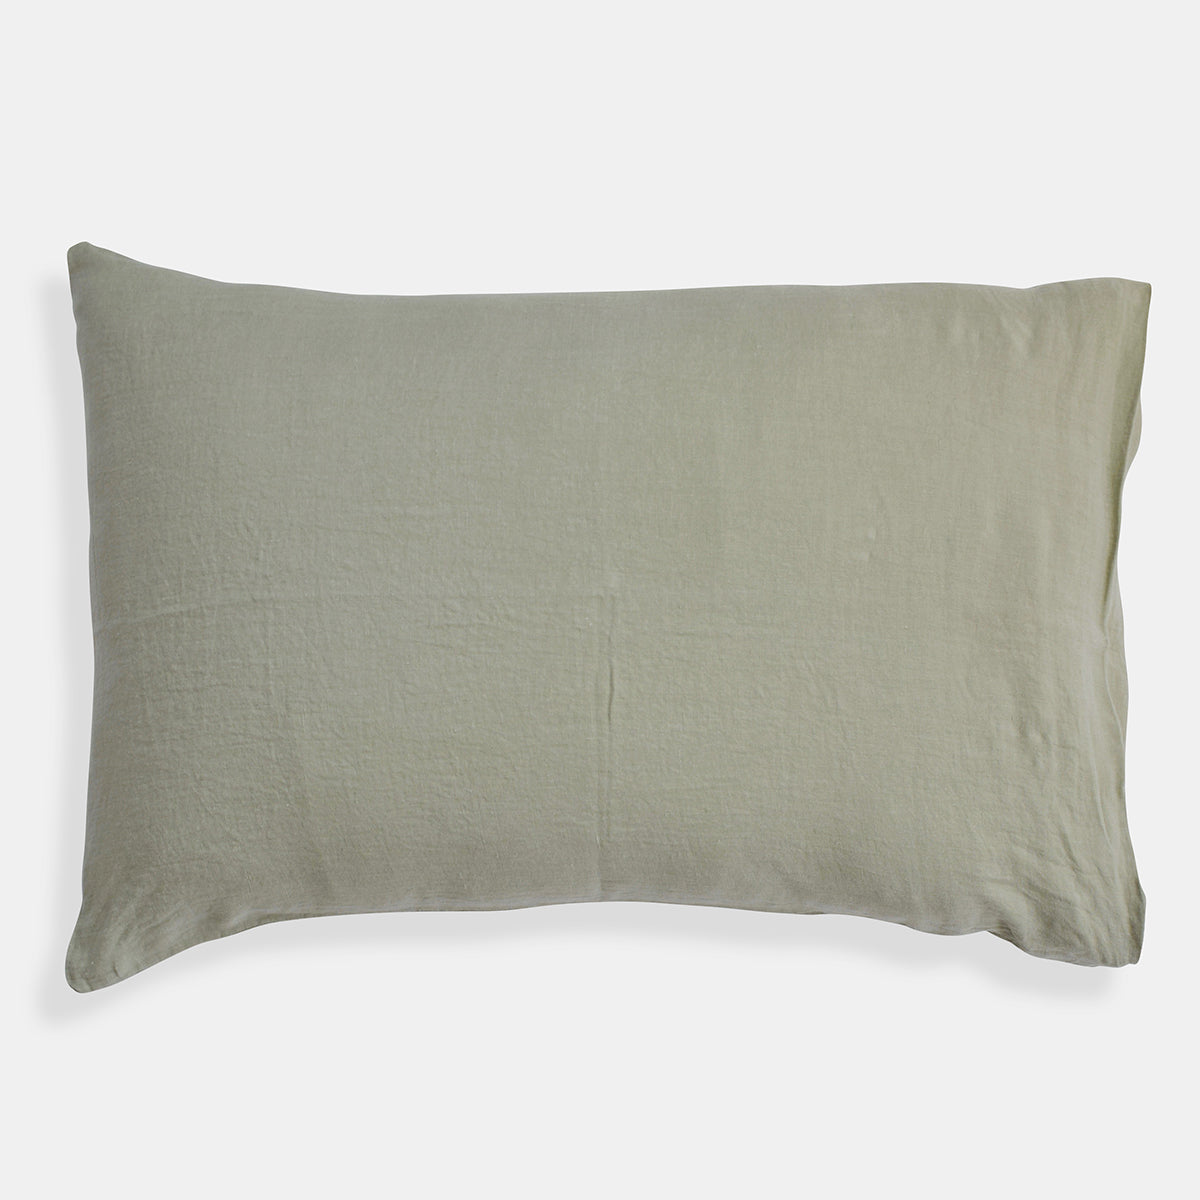 Linge Particulier Fennel Green Standard Linen Pillowcase Sham for a colorful linen bedding look in olive green - Collyer&#39;s Mansion